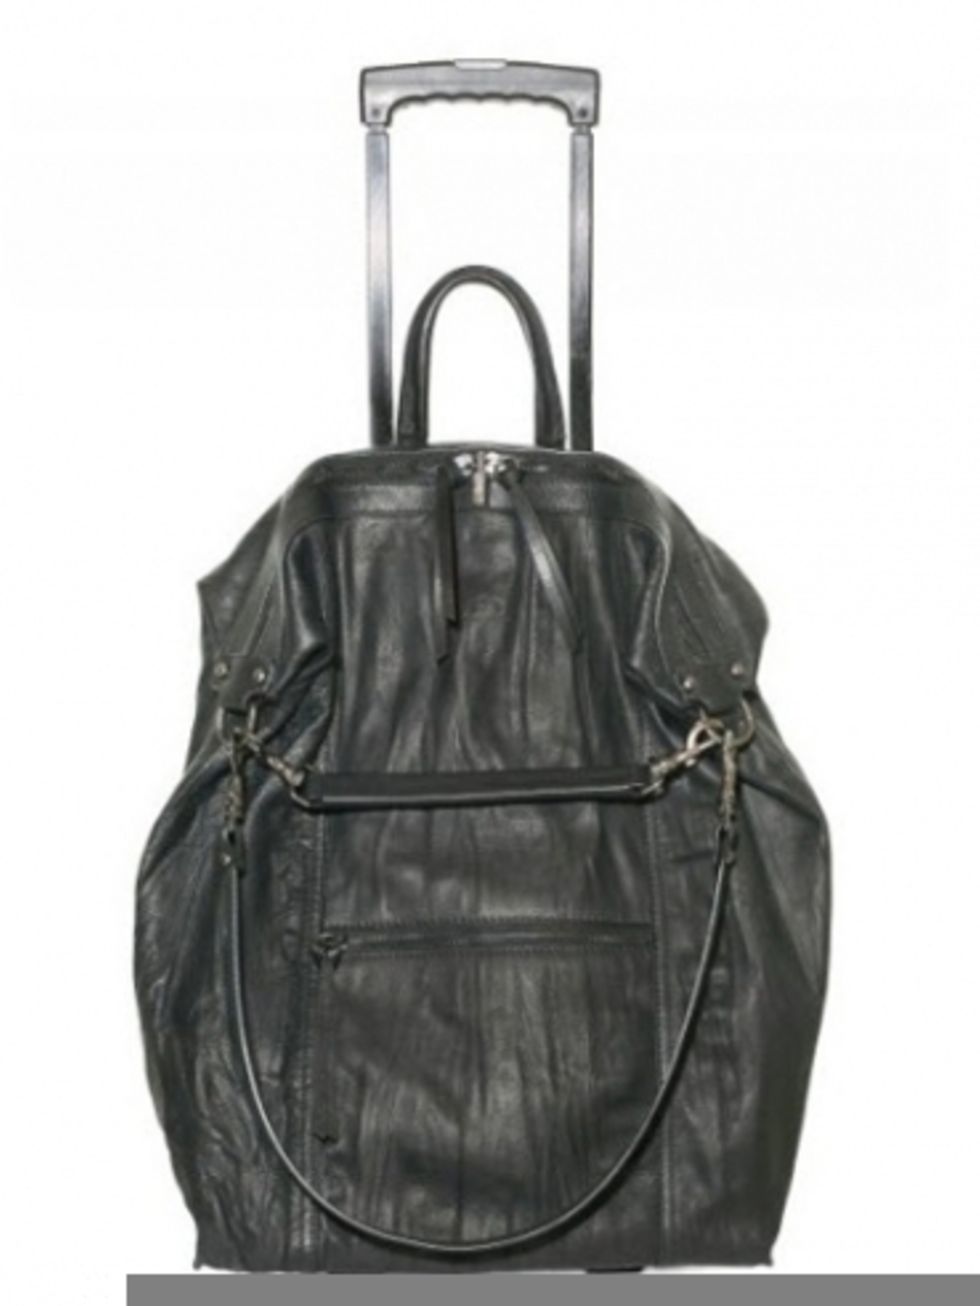 Product, Bag, Style, Luggage and bags, Leather, Black, Grey, Metal, Shoulder bag, Black-and-white, 